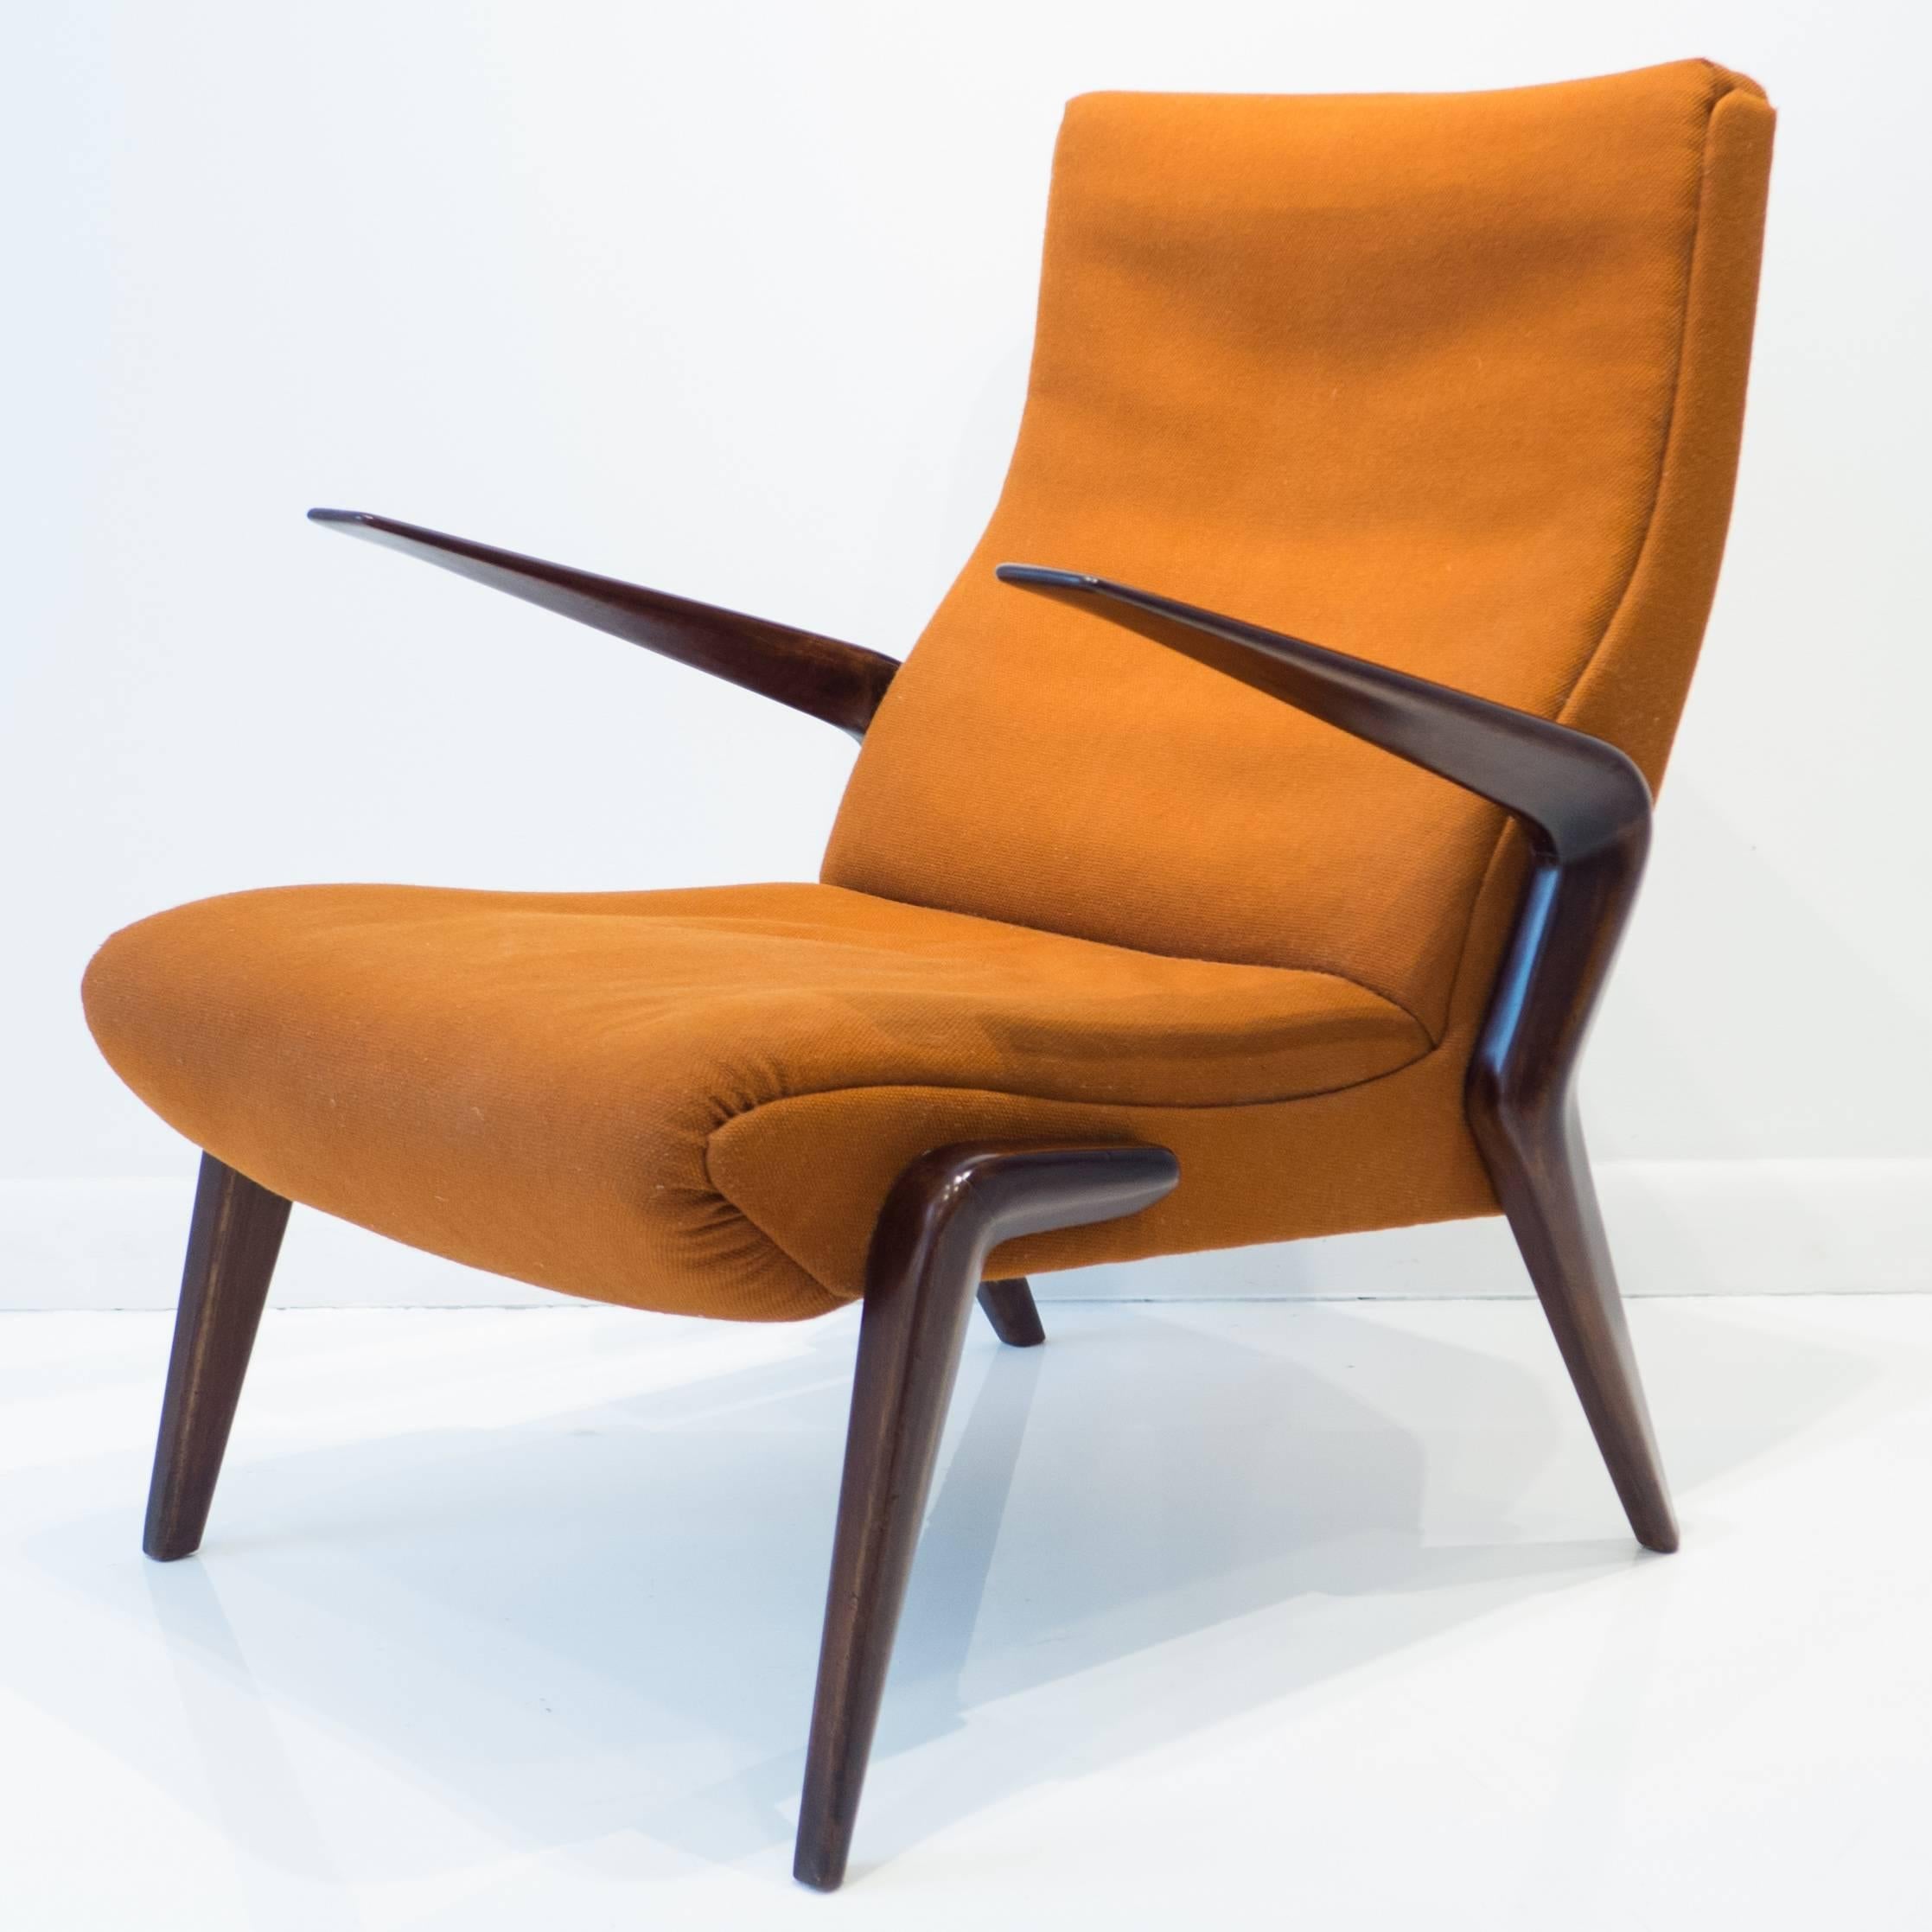 Lounge chair, model P71, designed by Osvaldo Borsani in 1954, and produced by his company, Tecno, circa 1950s. The sinuous carved walnut frame has been refinished; the fabric is original. A desirable and increasingly hard-to-find midcentury design